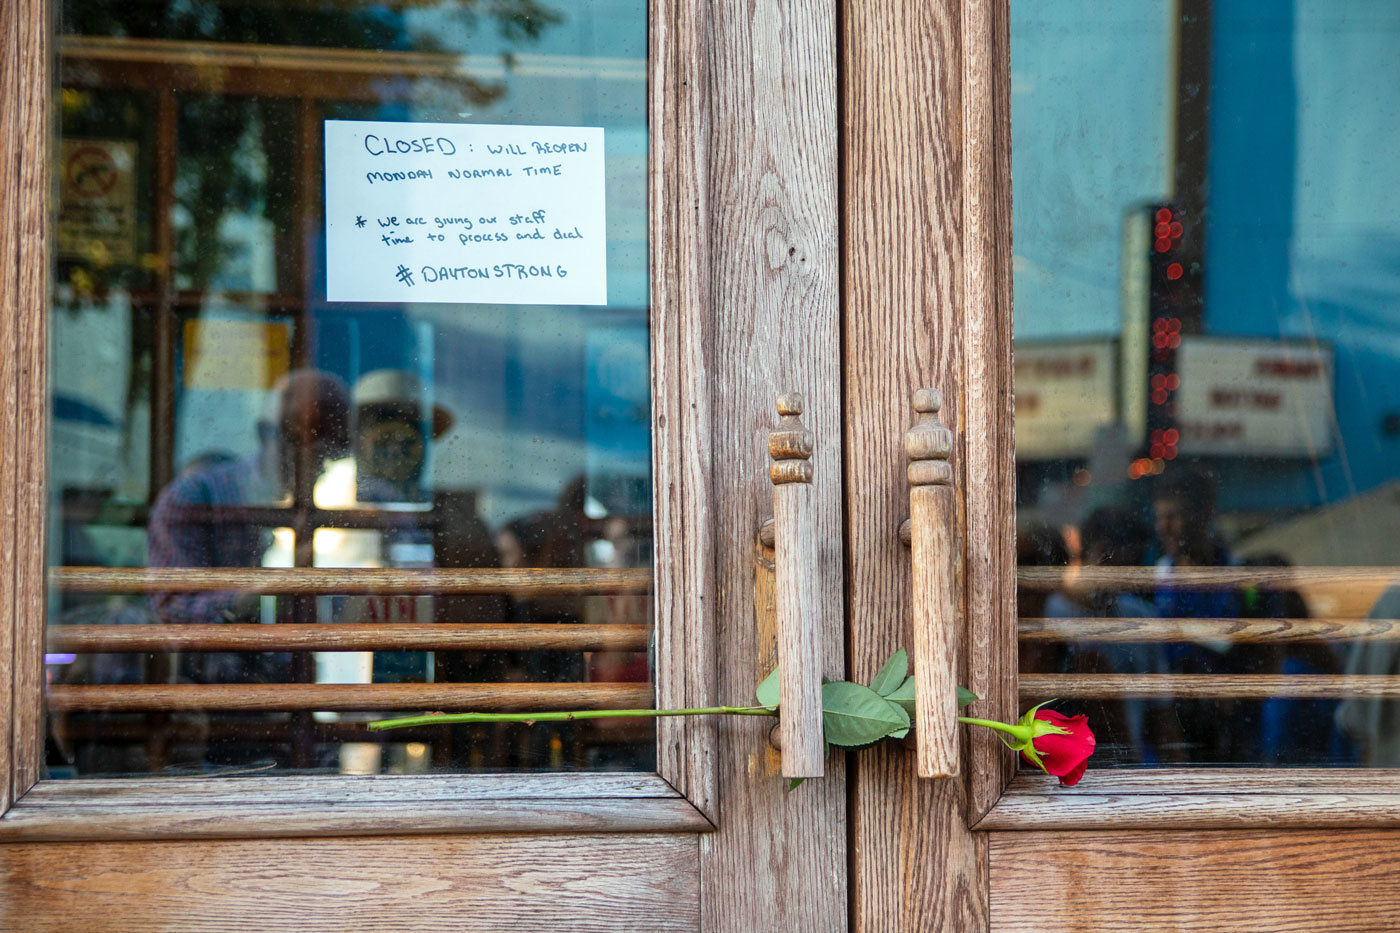 Ned Peppers Bar in Dayton, Ohio, was closed on Aug. 4, the day after nine people were killed near the bar’s entrance.